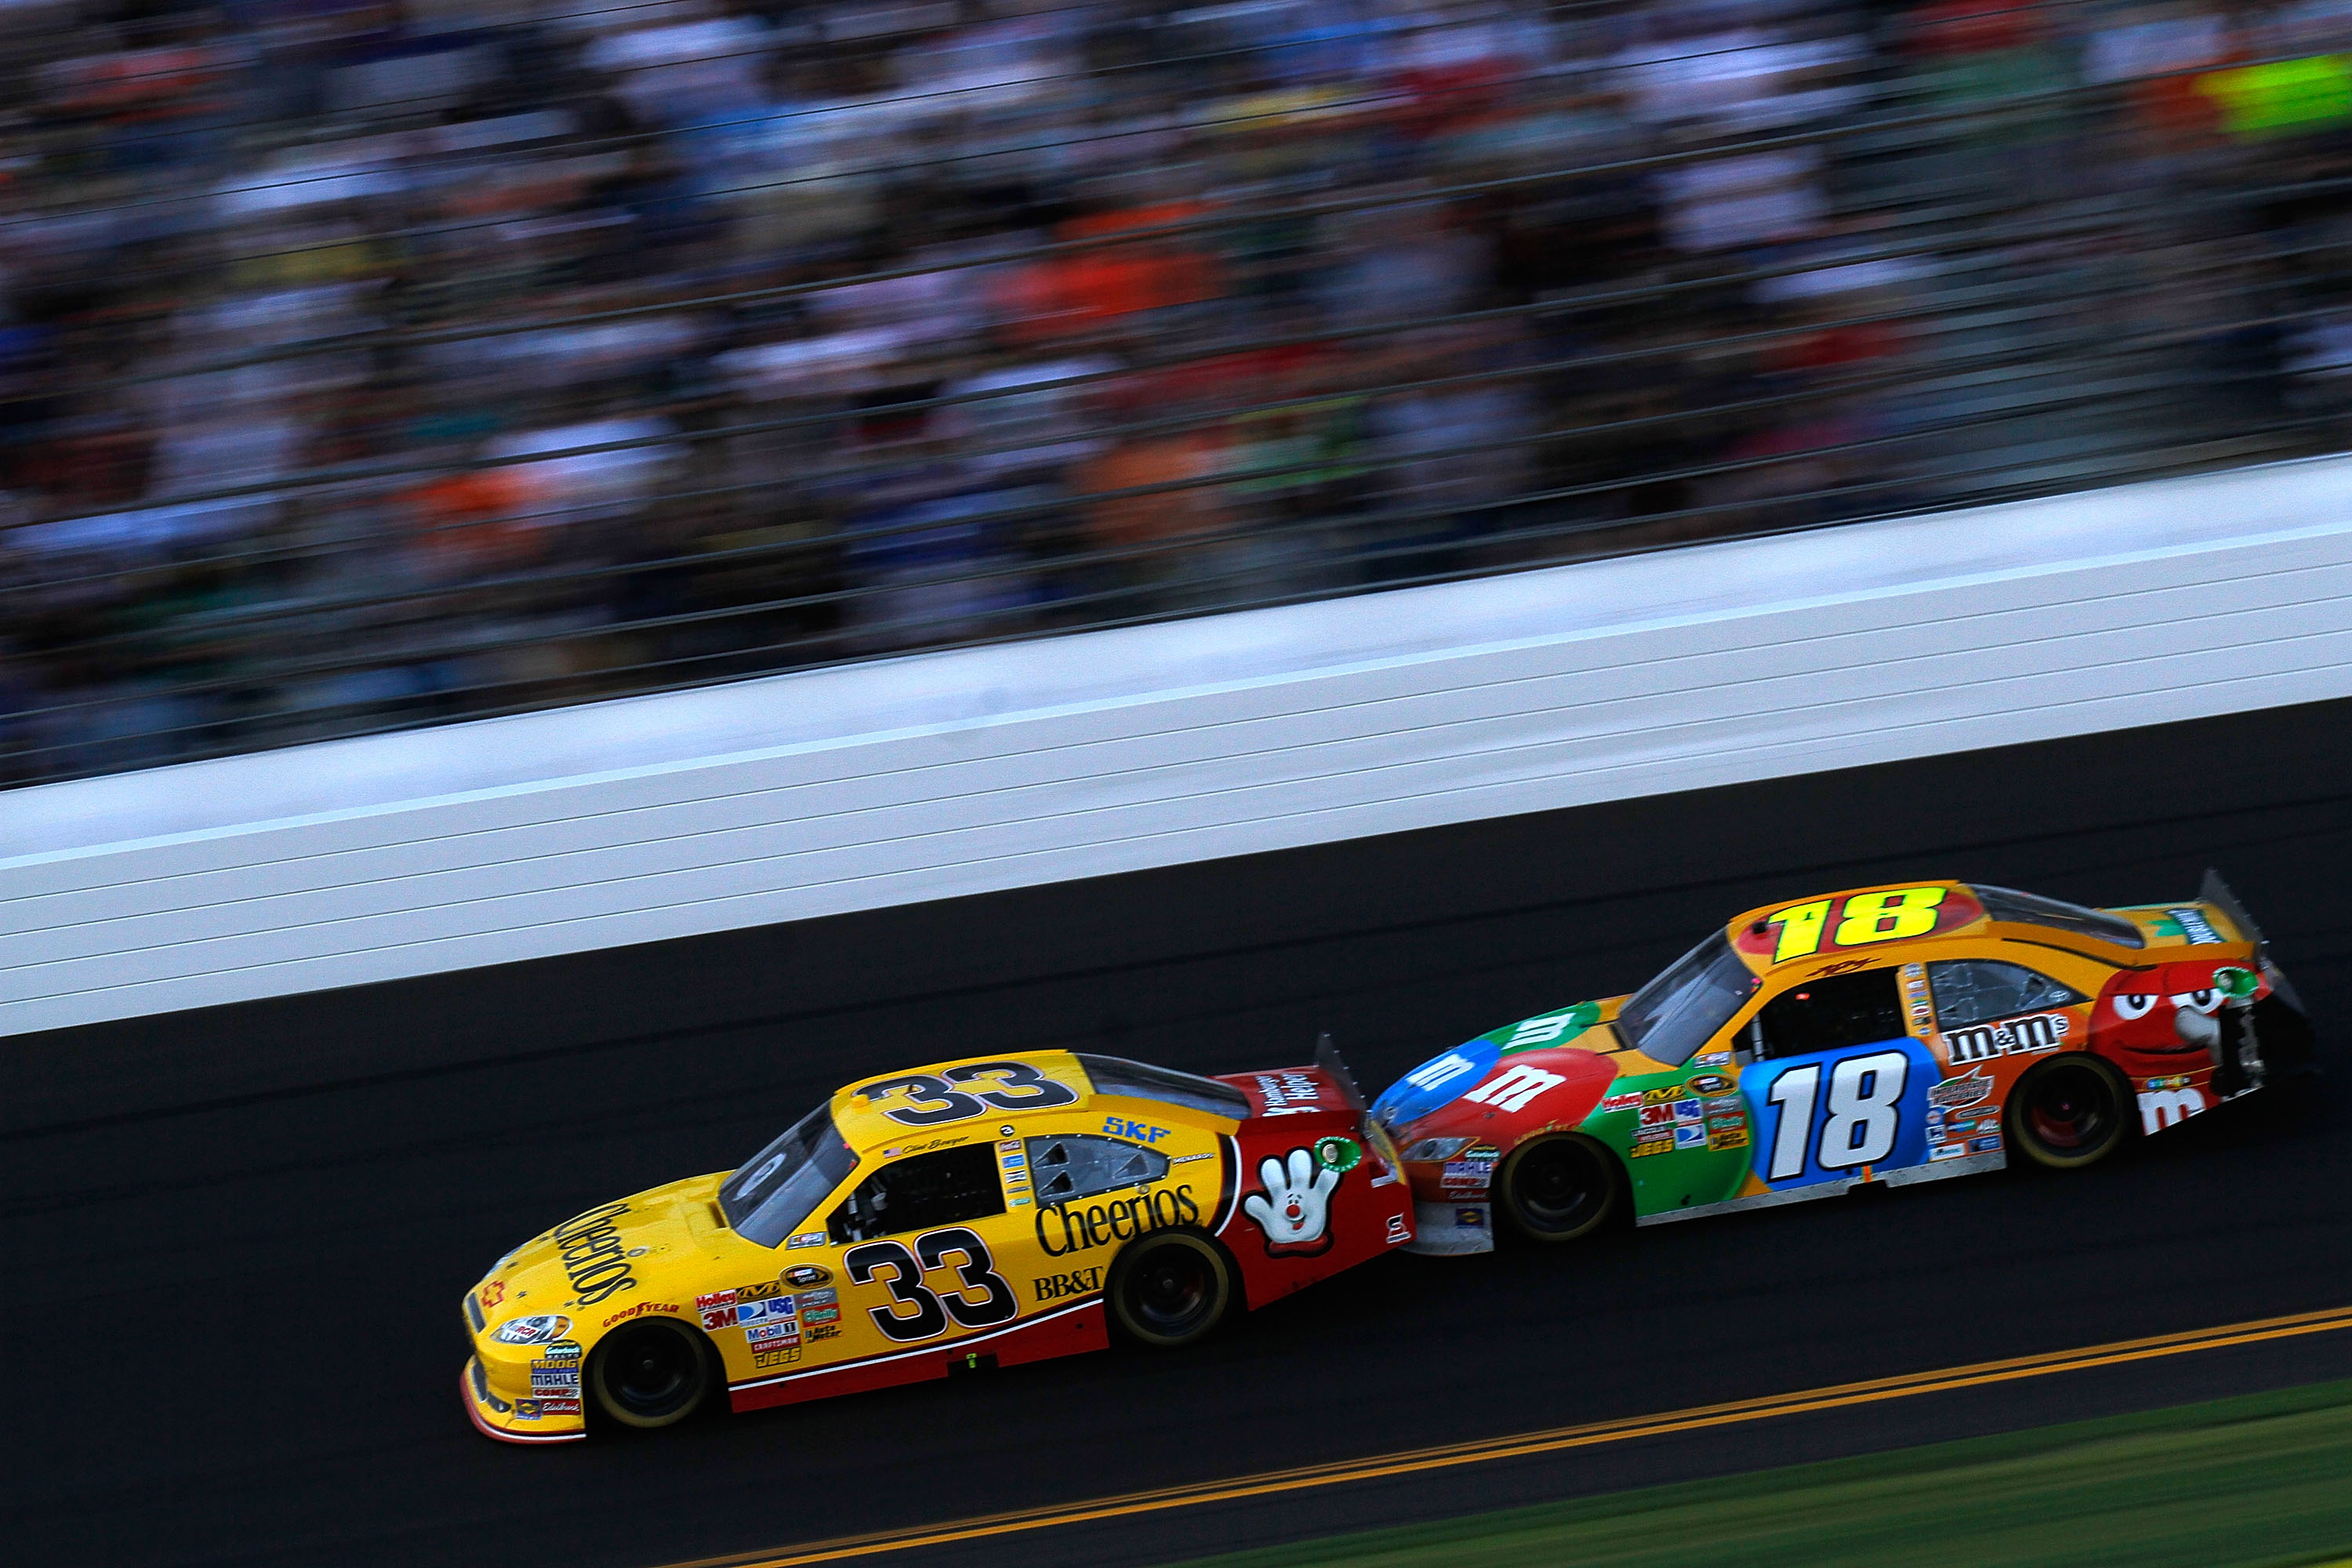 DAYTONA BEACH, FL - FEBRUARY 20:  Clint Bowyer, driver of the #33 Cheerios Chevrolet,  and Kyle Busch, driver of the #18 M&M'sToyota, race during the NASCAR Sprint Cup Series Daytona 500 at Daytona International Speedway on February 20, 2011 in Daytona Be